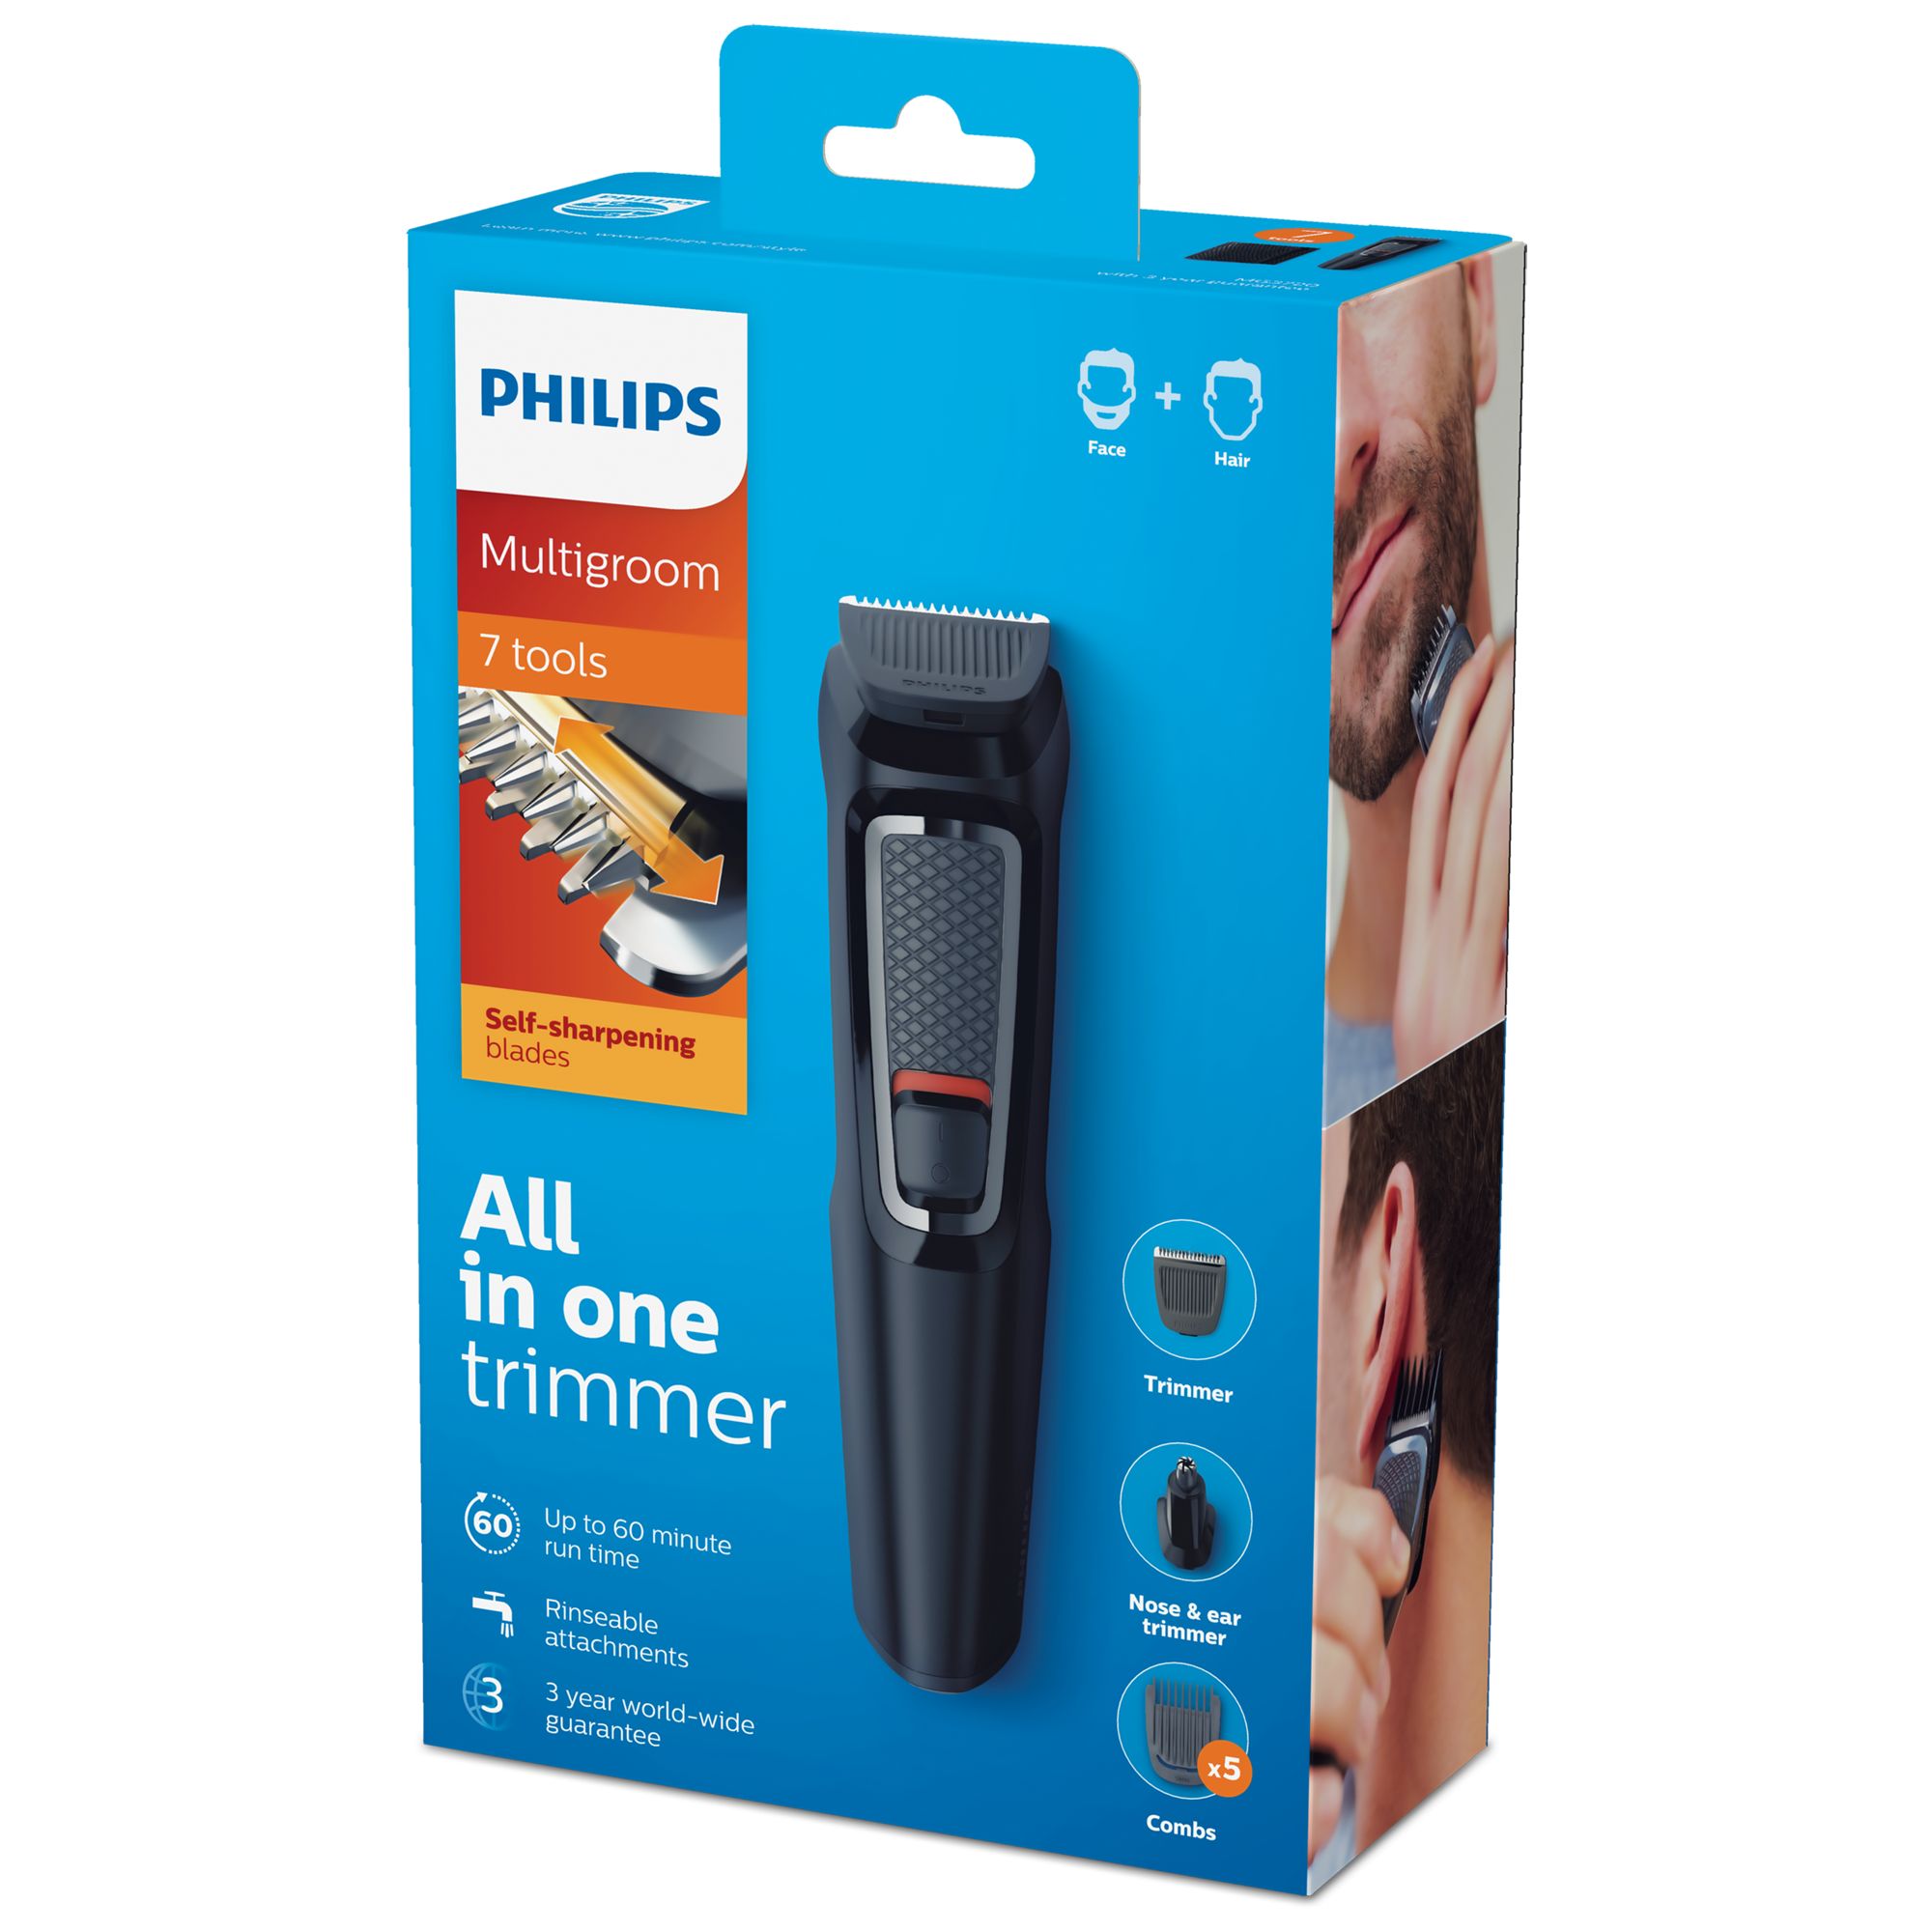 philips mg3720 review